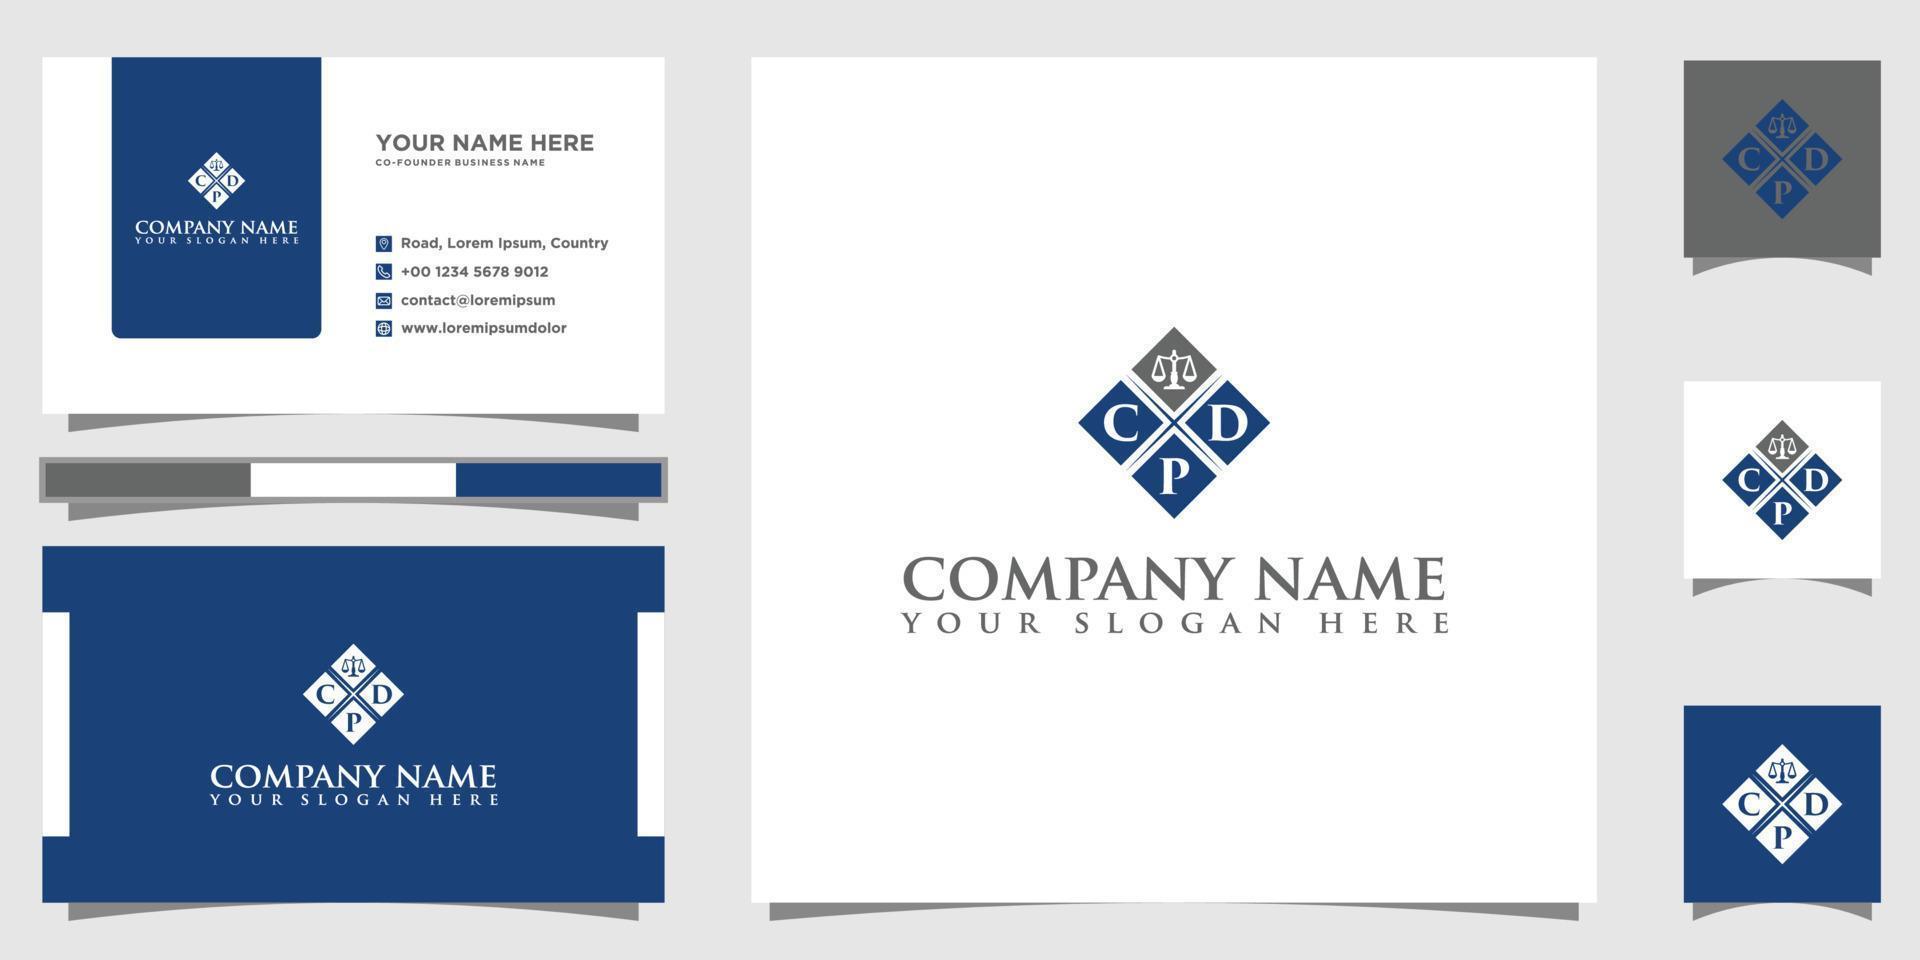 Letter CPD Justice Law logo, design Attorney logo with business card vector